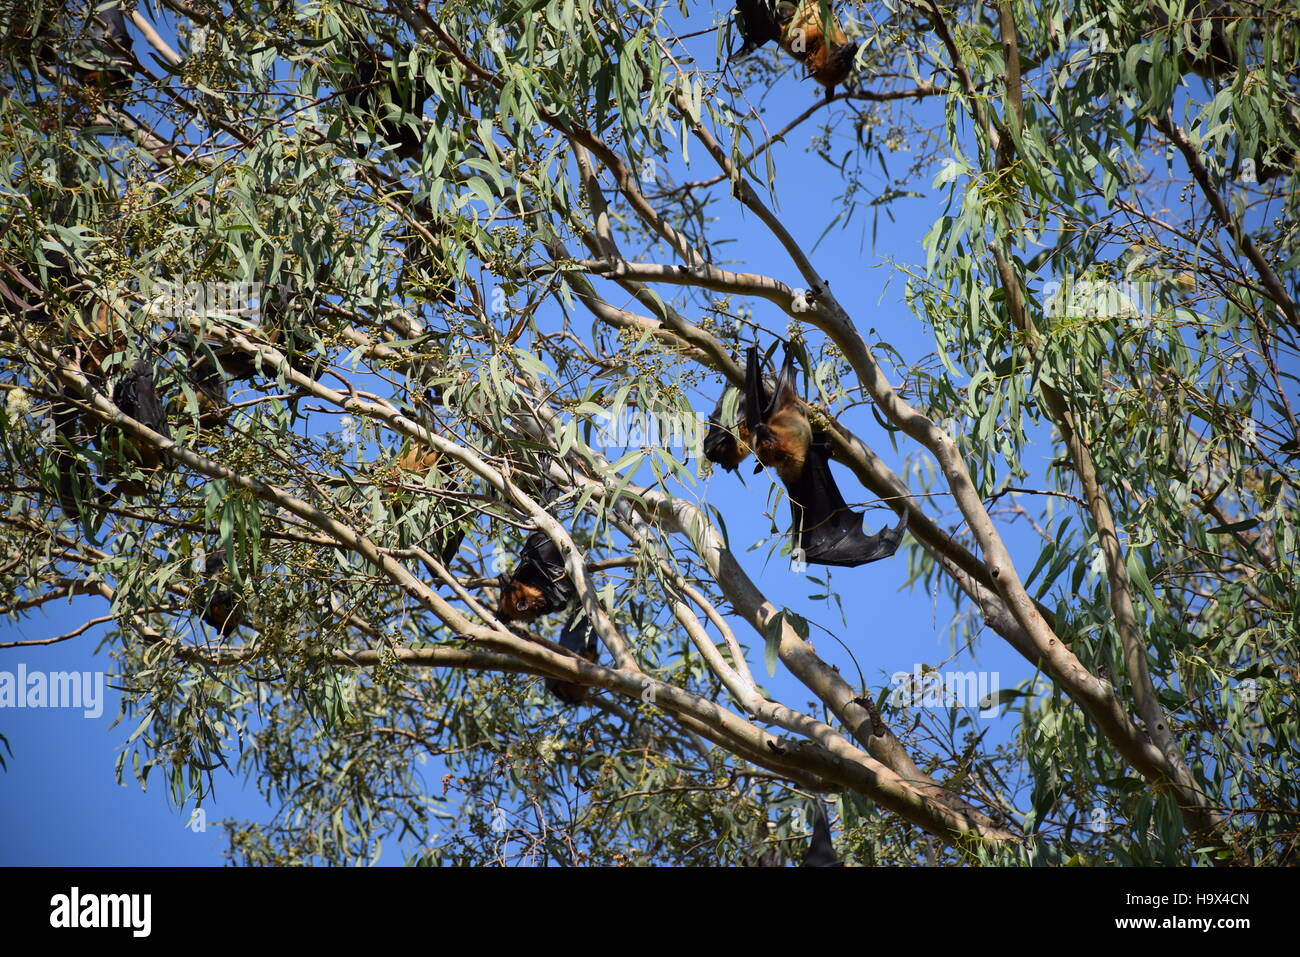 Giant bats hanging upside down from a tree in Rajasthan, India Stock Photo